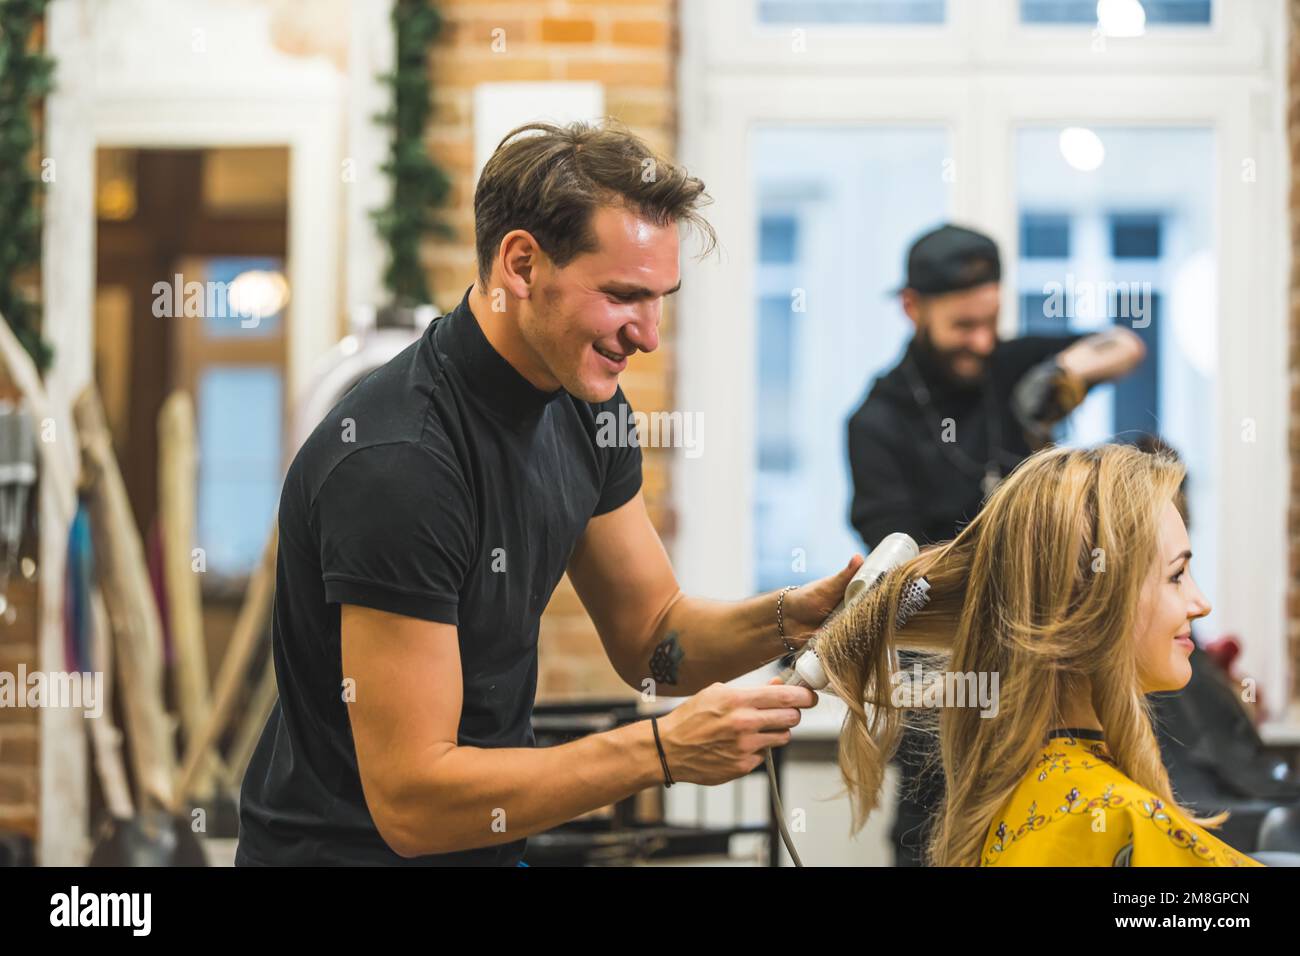 joyful hairdresser drying and combing blond woman's hair, another barber working in the background. High quality photo Stock Photo